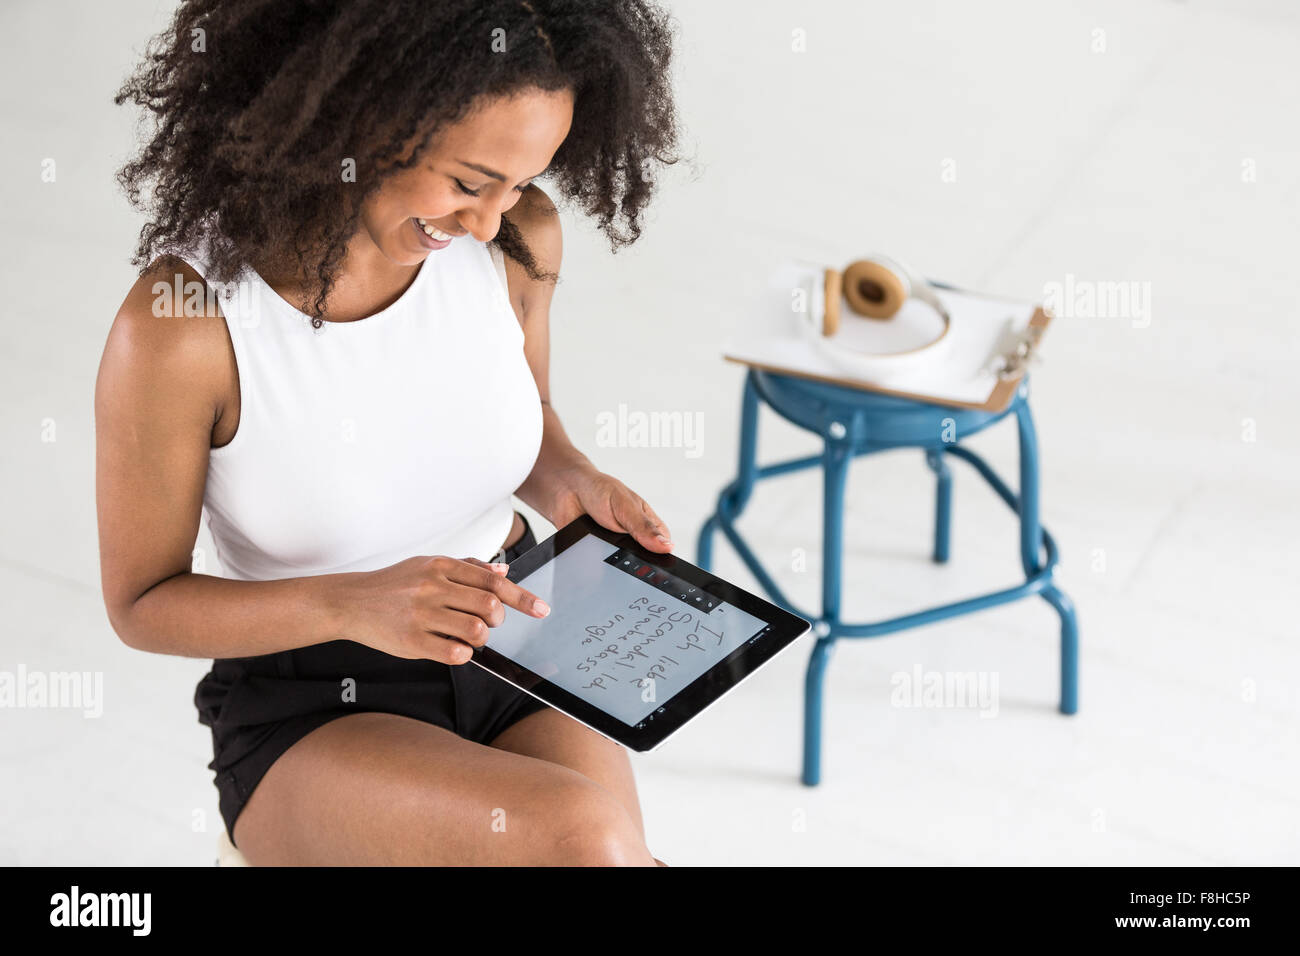 A young Afro-American woman using a tablet or iPad in a studio type setting Stock Photo